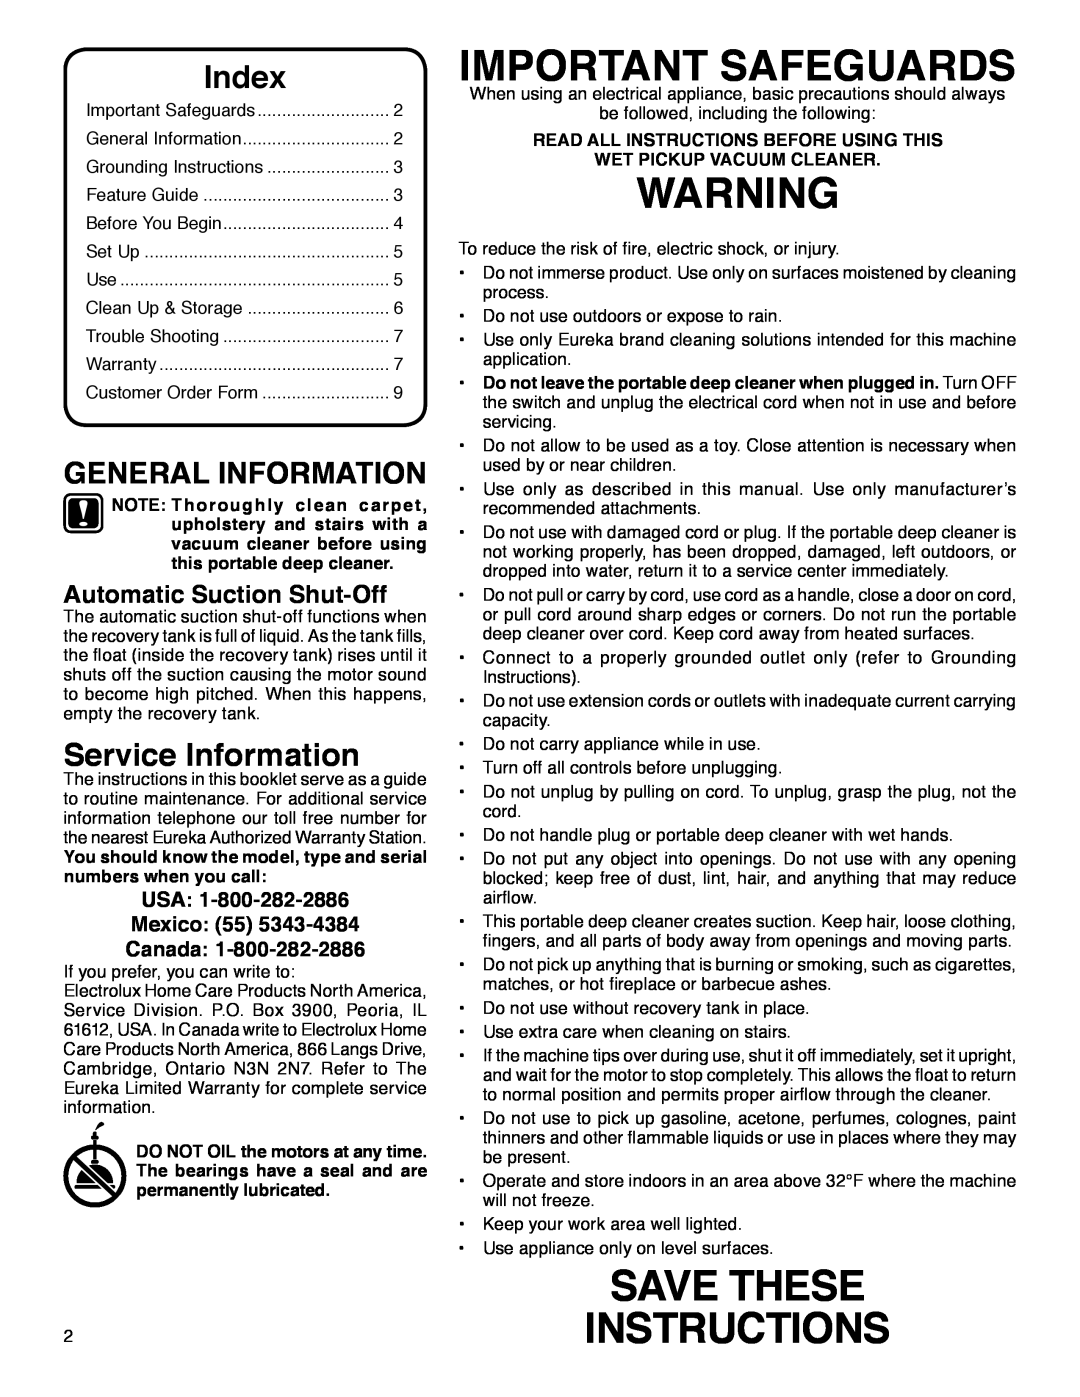 Eureka 2550 manual Important Safeguards, SAVE THESE 2INSTRUCTIONS, Index, Service Information, Automatic Suction Shut-Off 